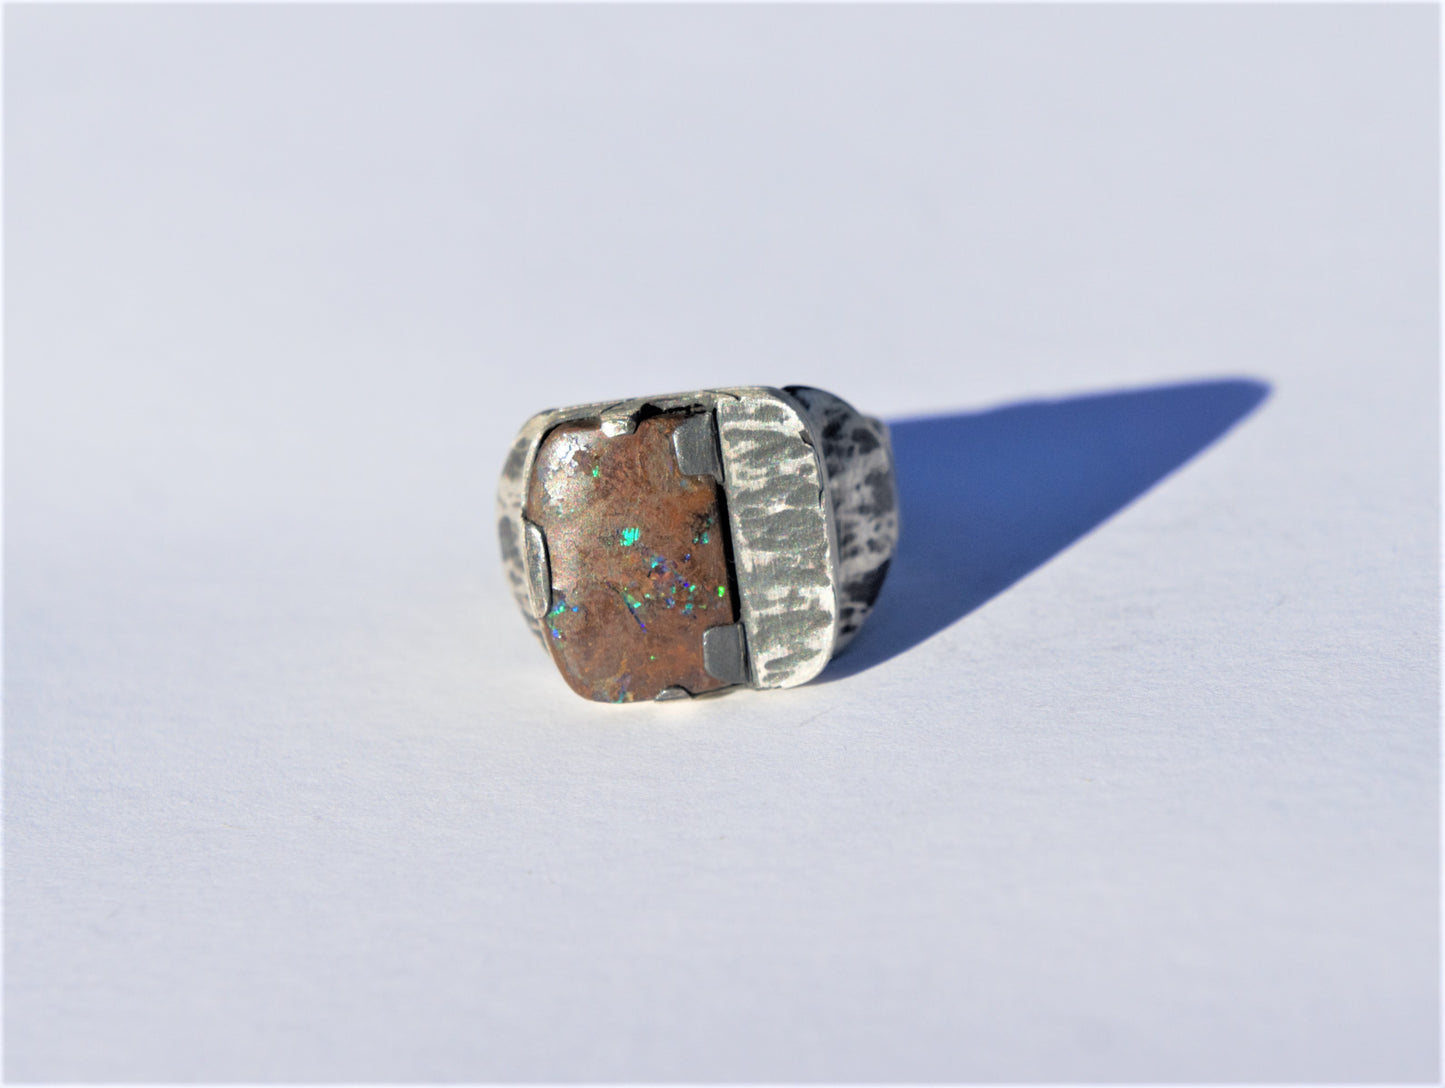 Australian Boulder Opal in a Silver Sovereign Style Ring